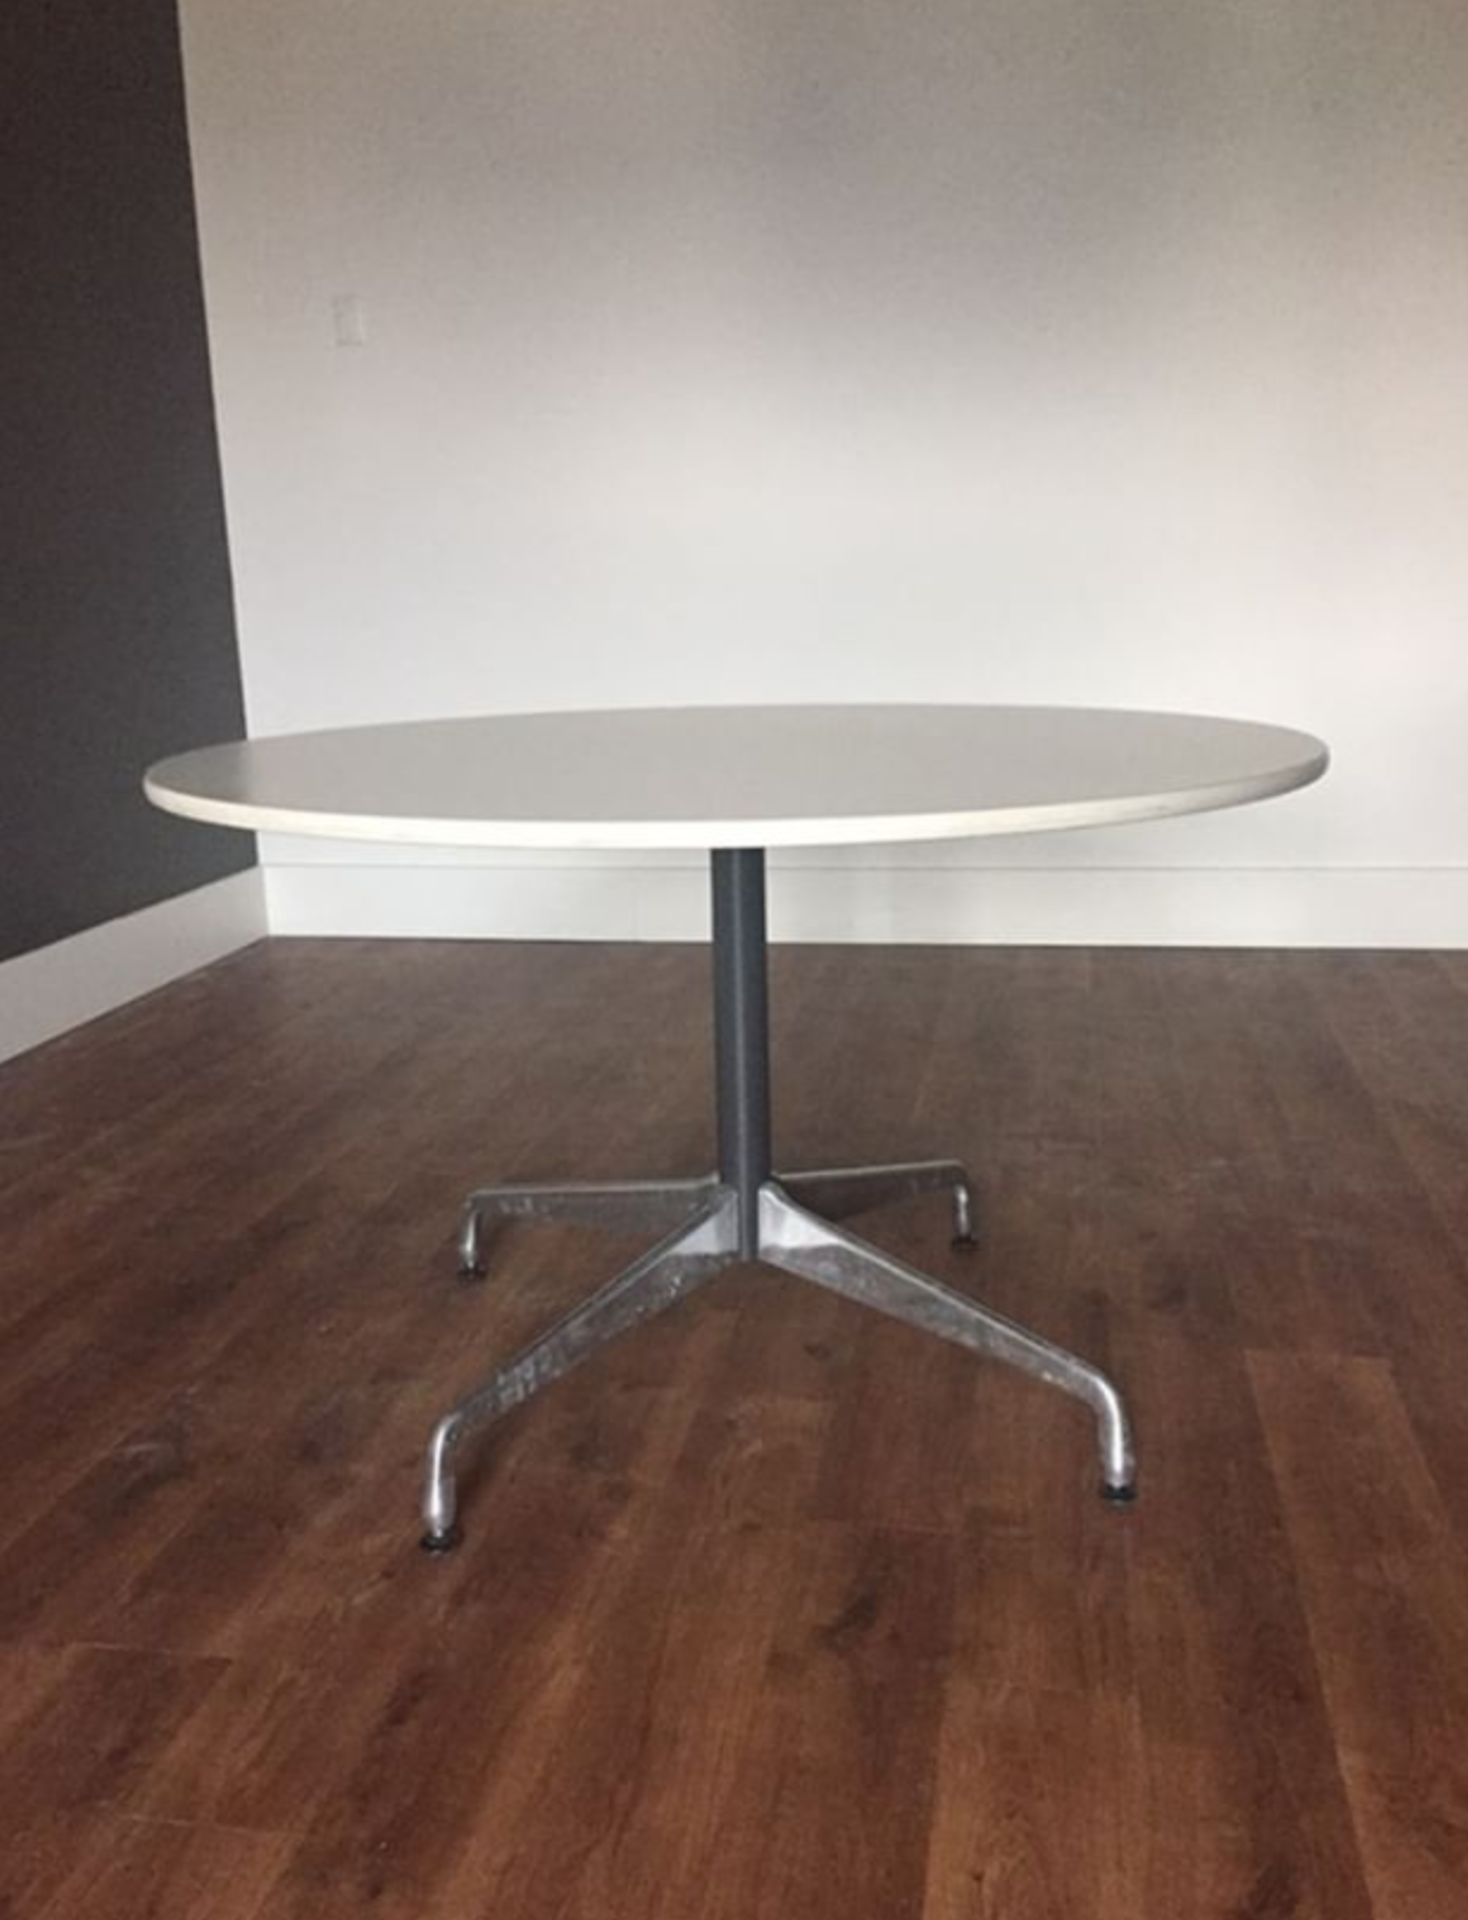 HERMAN MILLER 36" ROUND TABLE(LOCATED IN ST-REMI, QC)